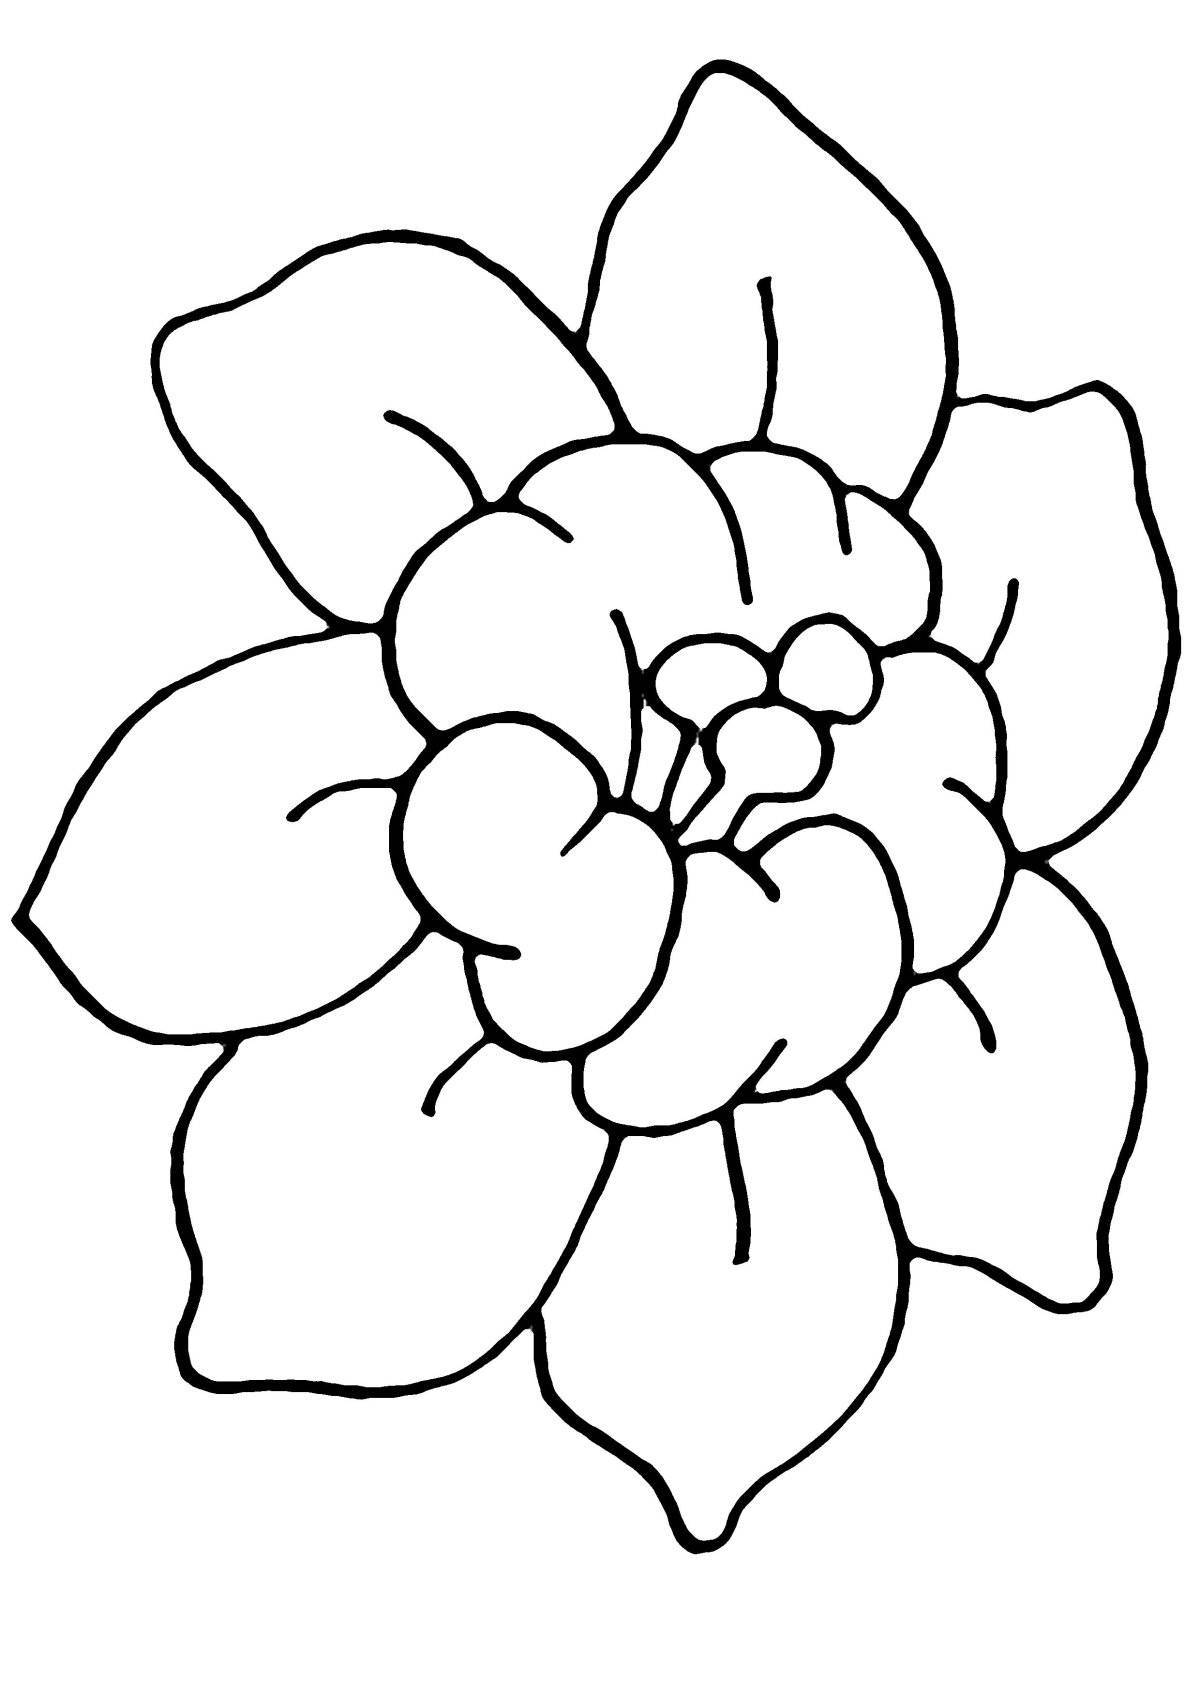 Sublime flowers coloring page